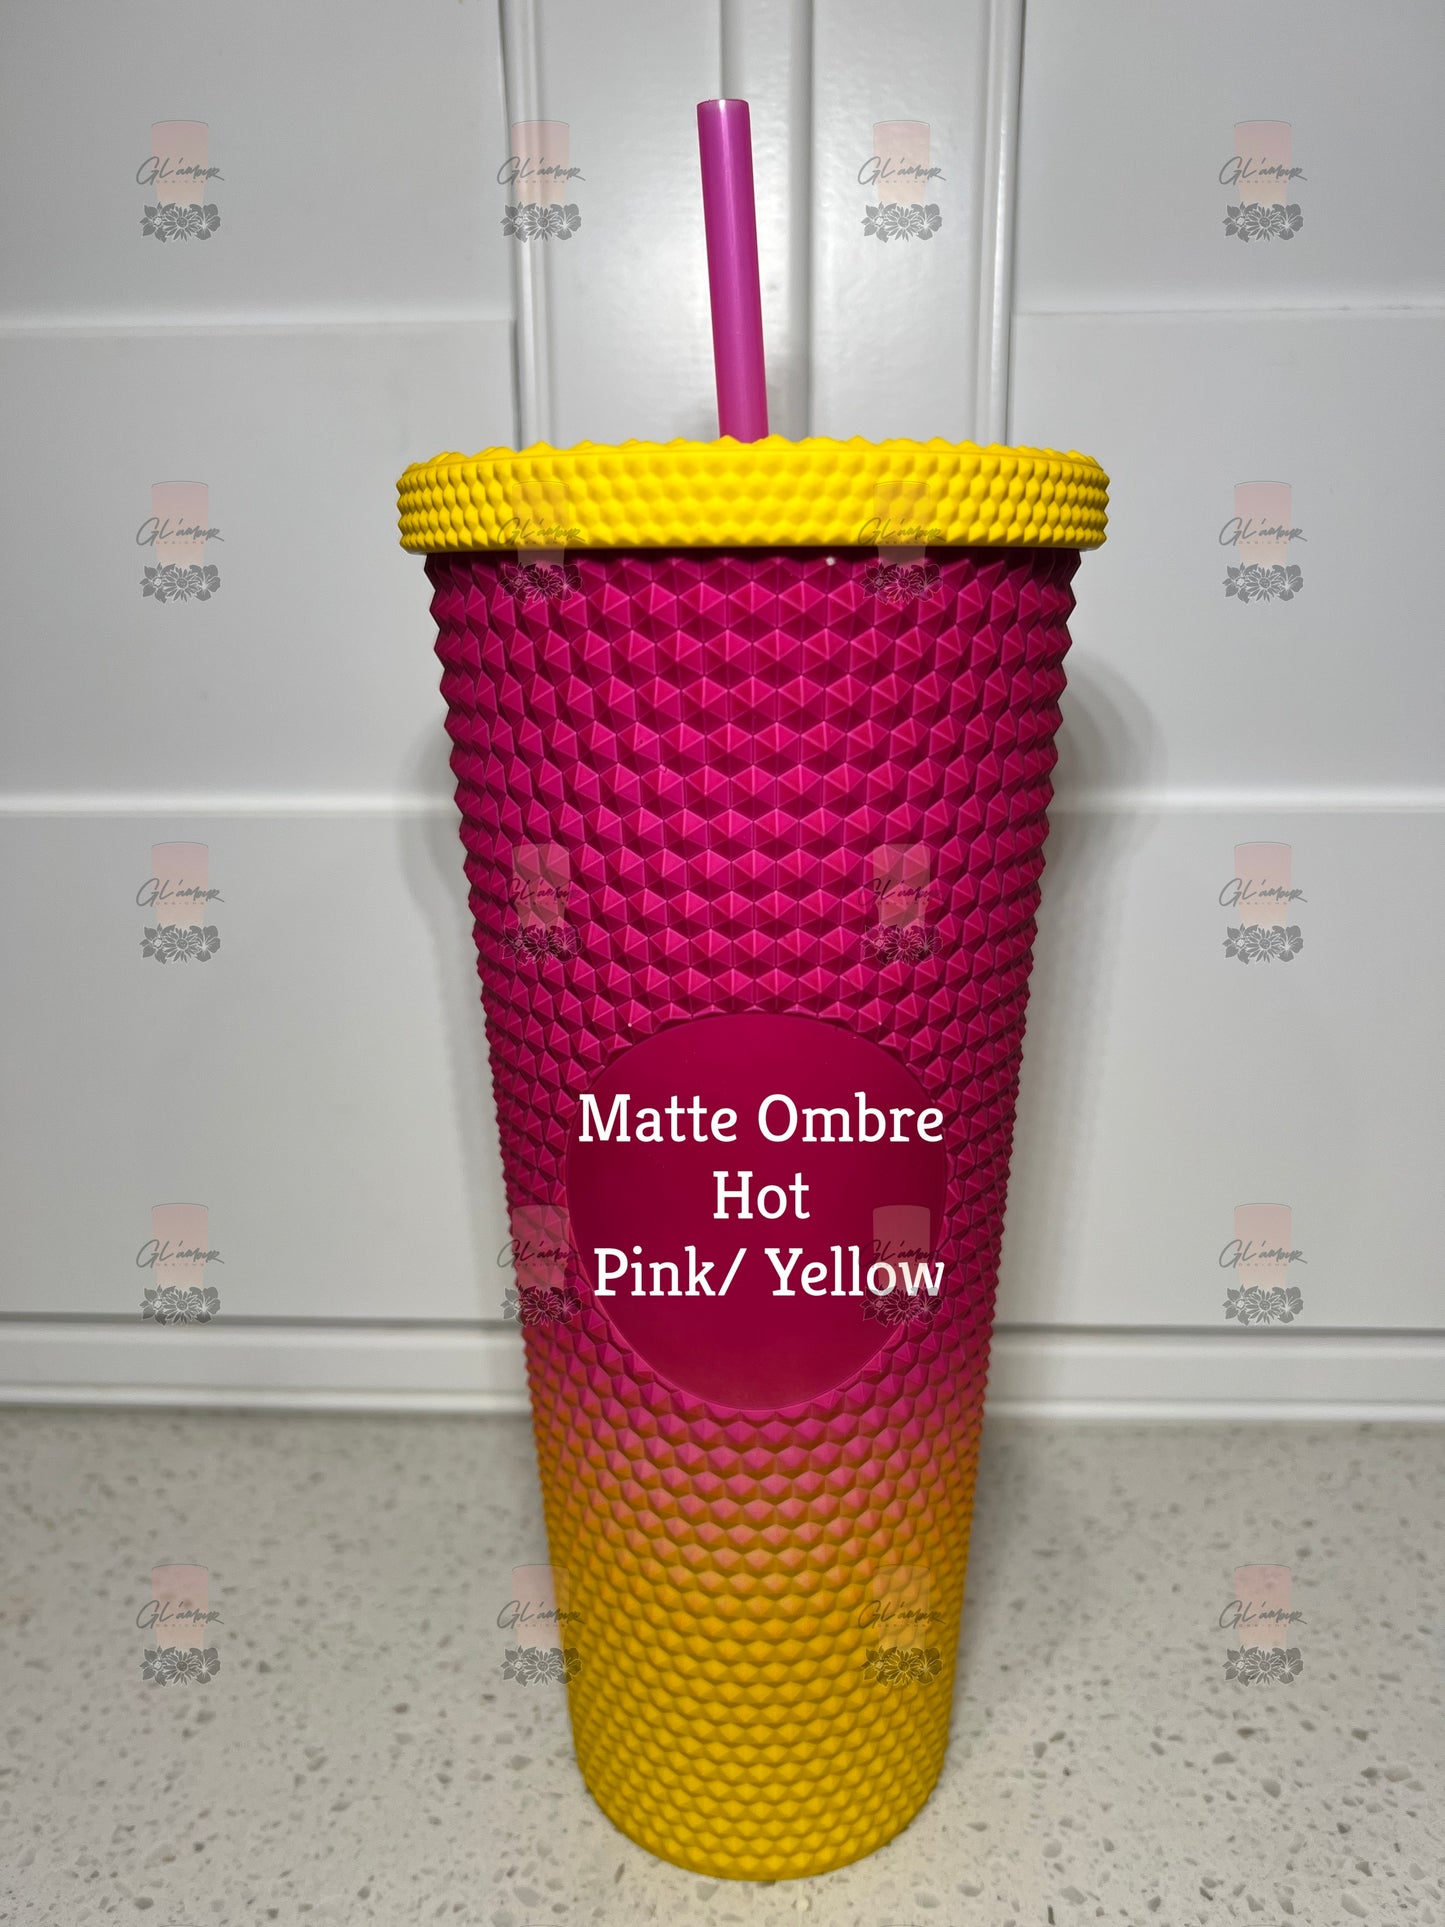 Matte Ombre Hot Pink/Yellow 24 oz